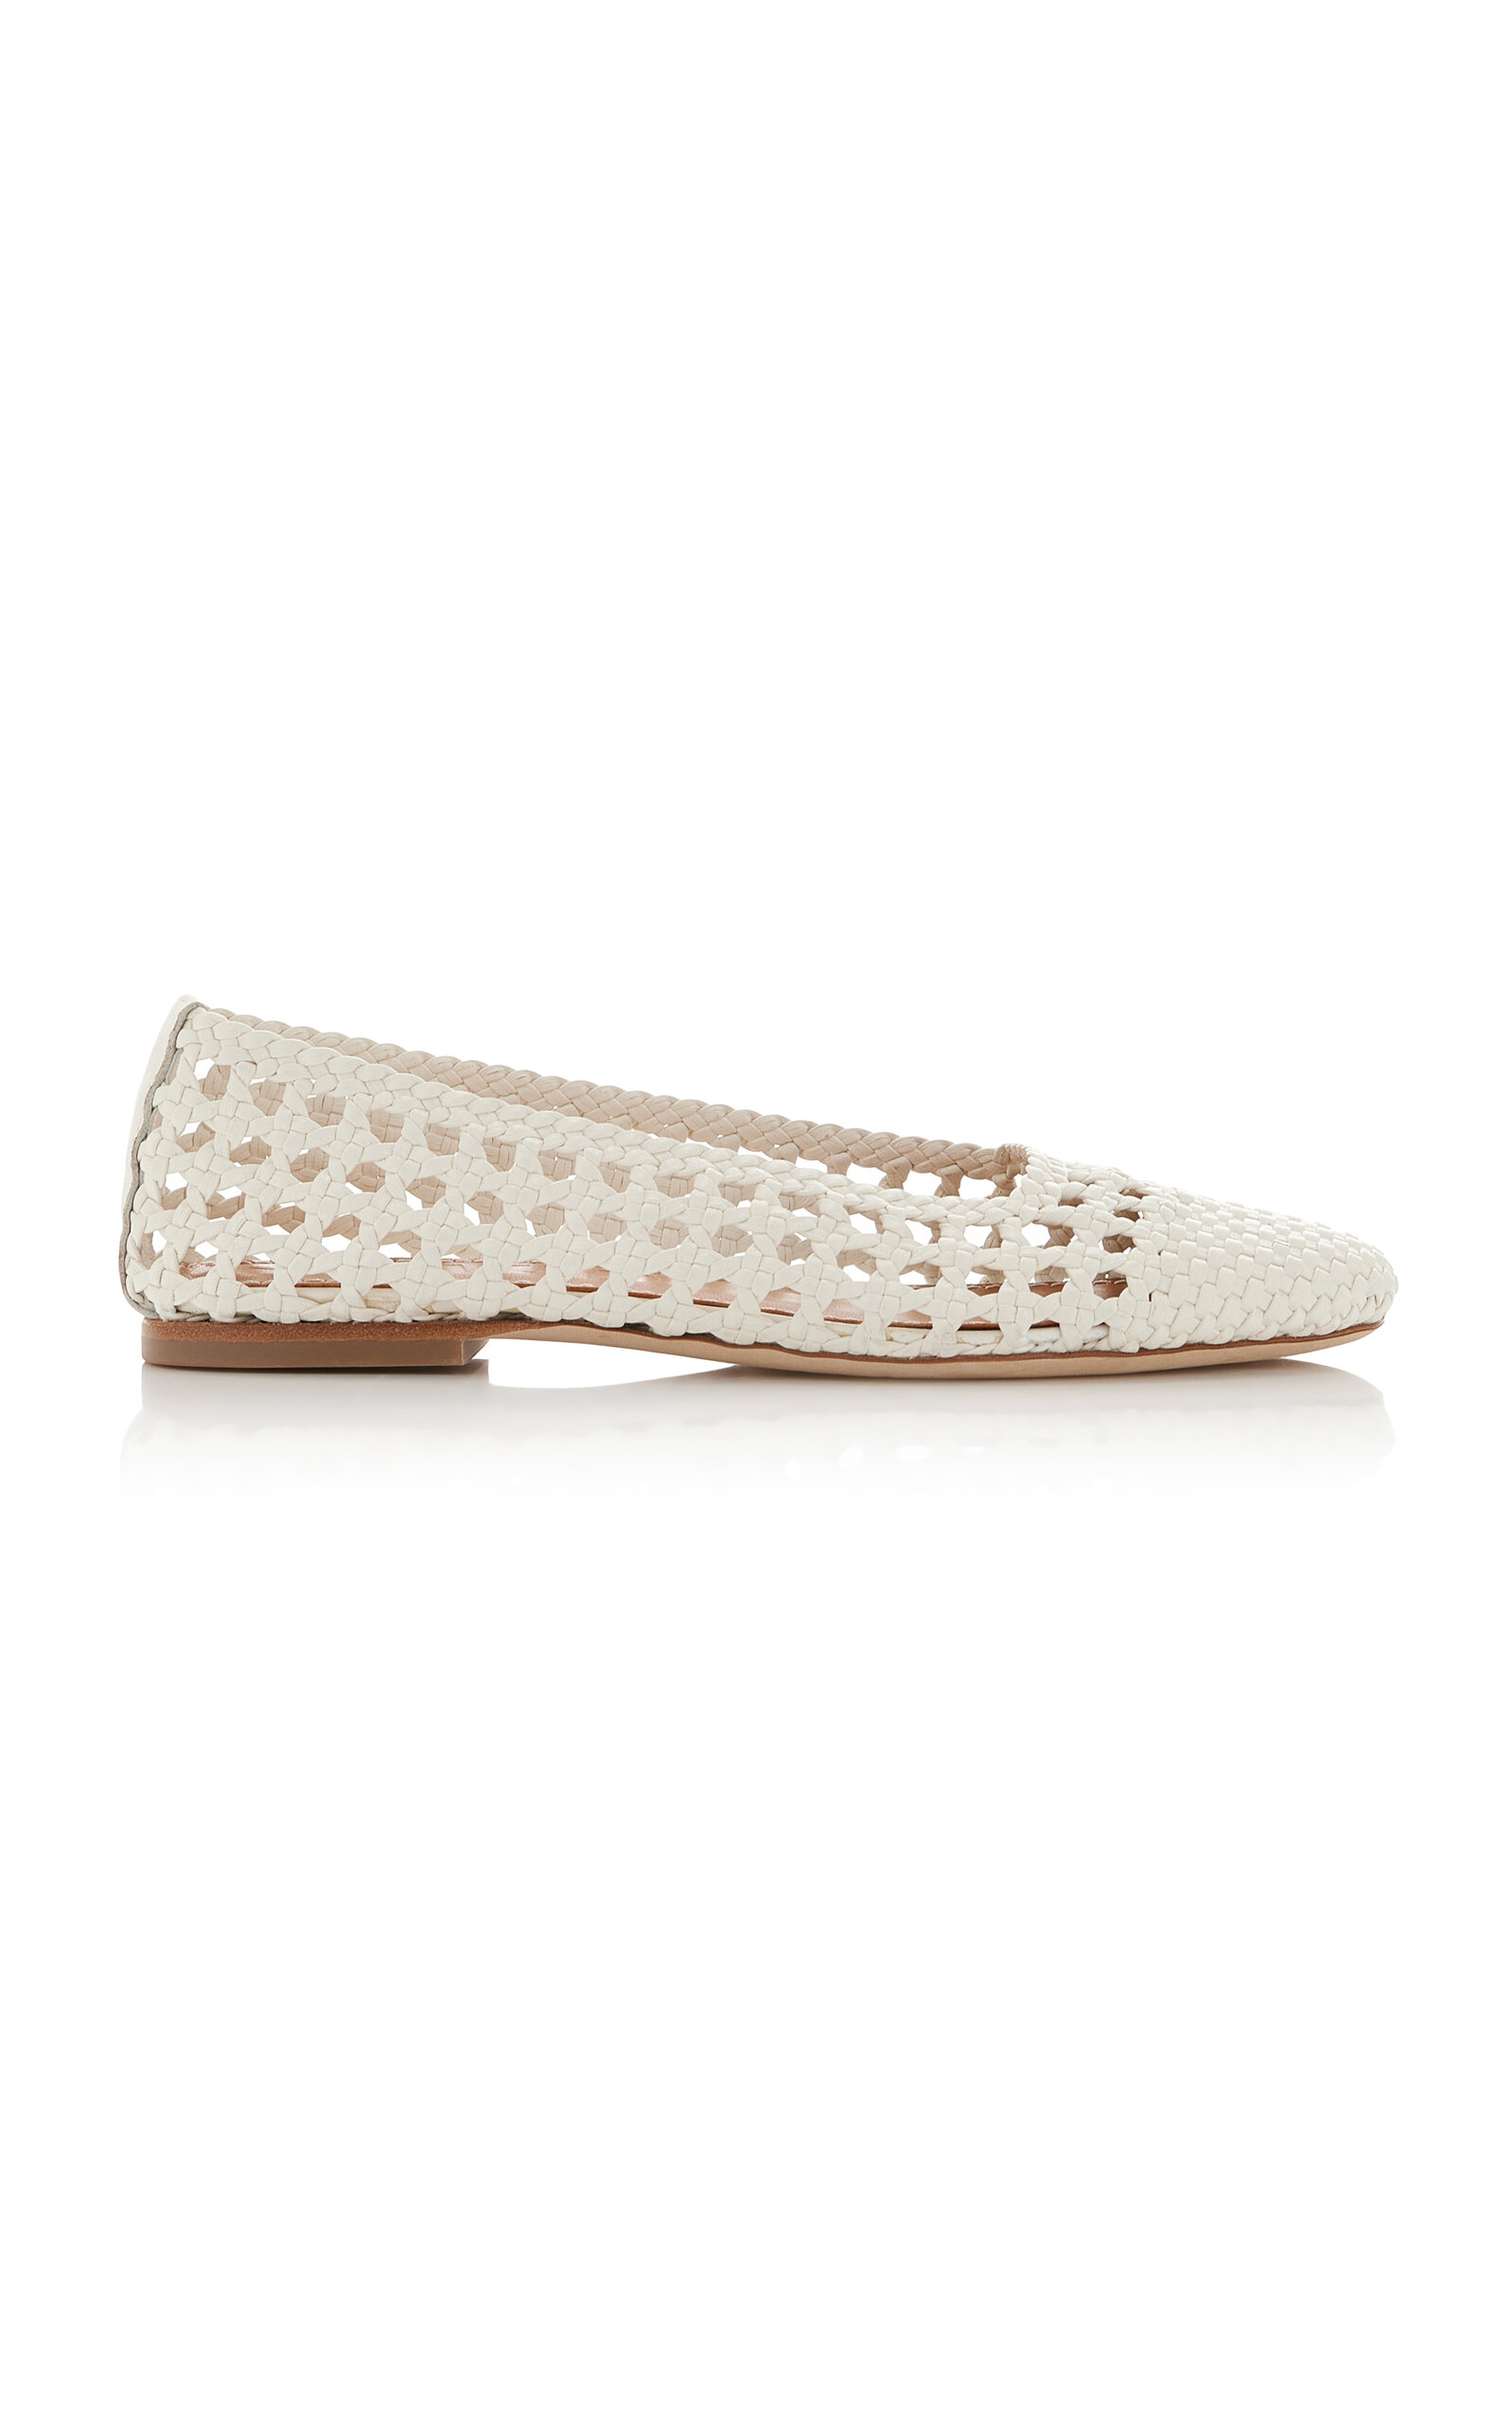 Nell Crocheted Leather Flats